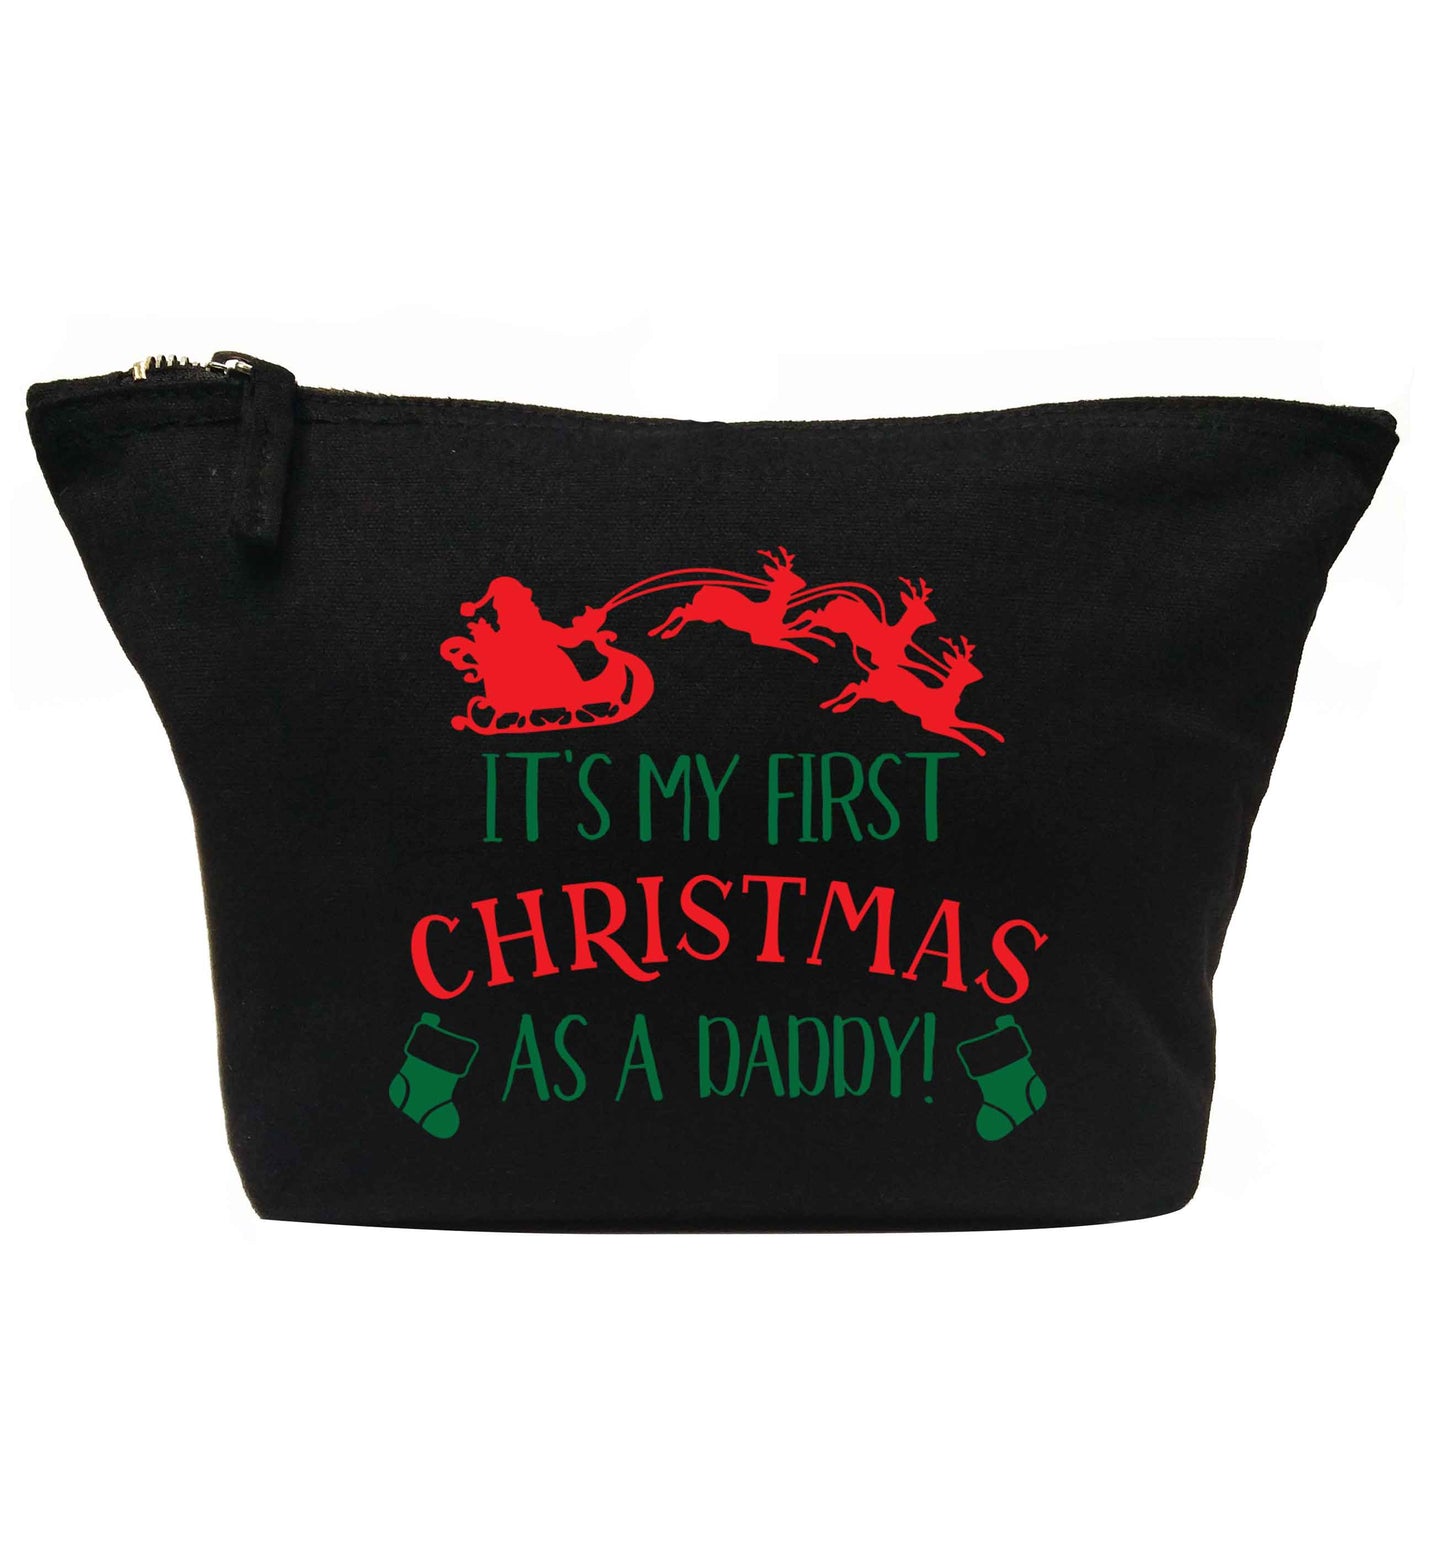 It's my first Christmas as a daddy | makeup / wash bag